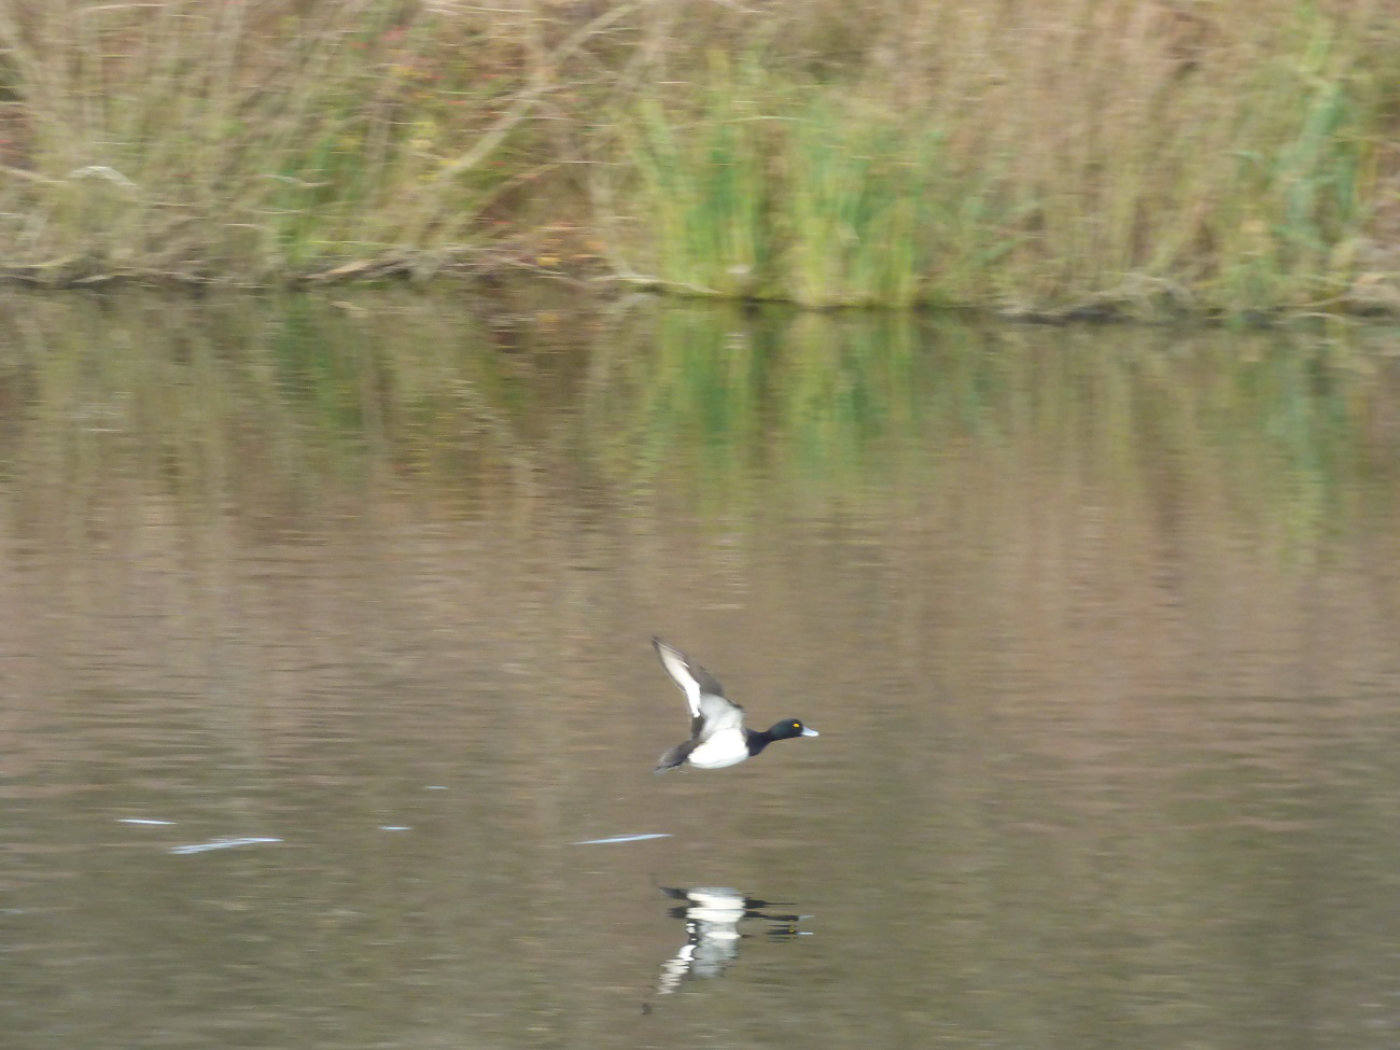 Tufted duck flying